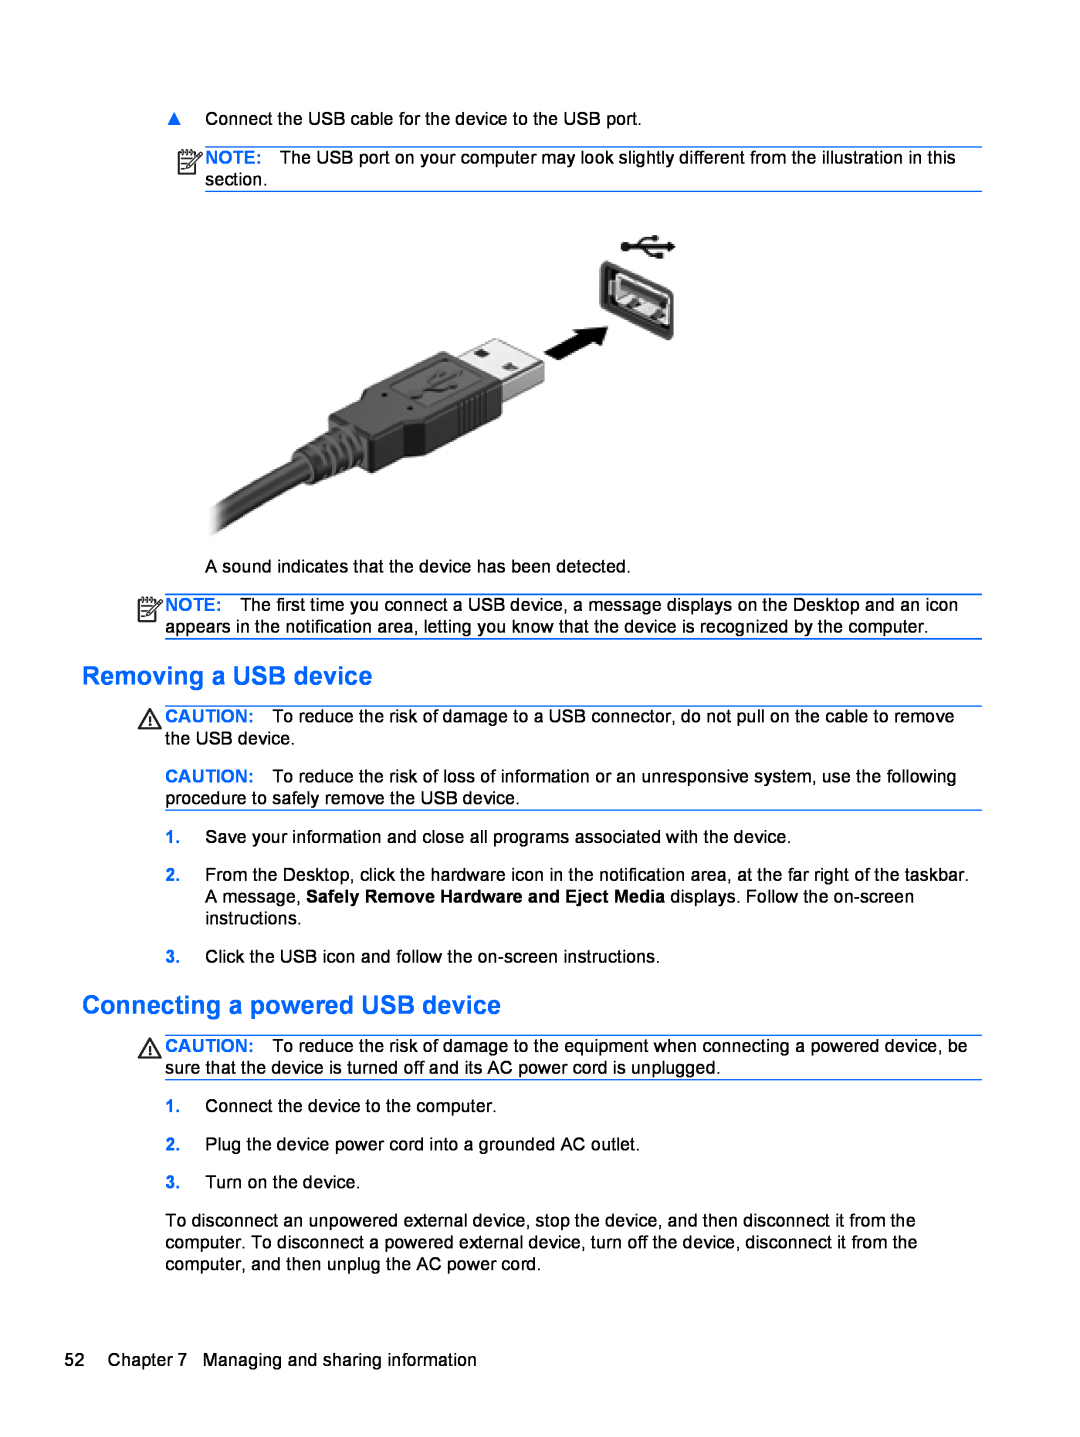 HP C2L36UA#ABA, C7S02UA#ABA, C2M17UA#ABA manual Removing a USB device, Connecting a powered USB device 